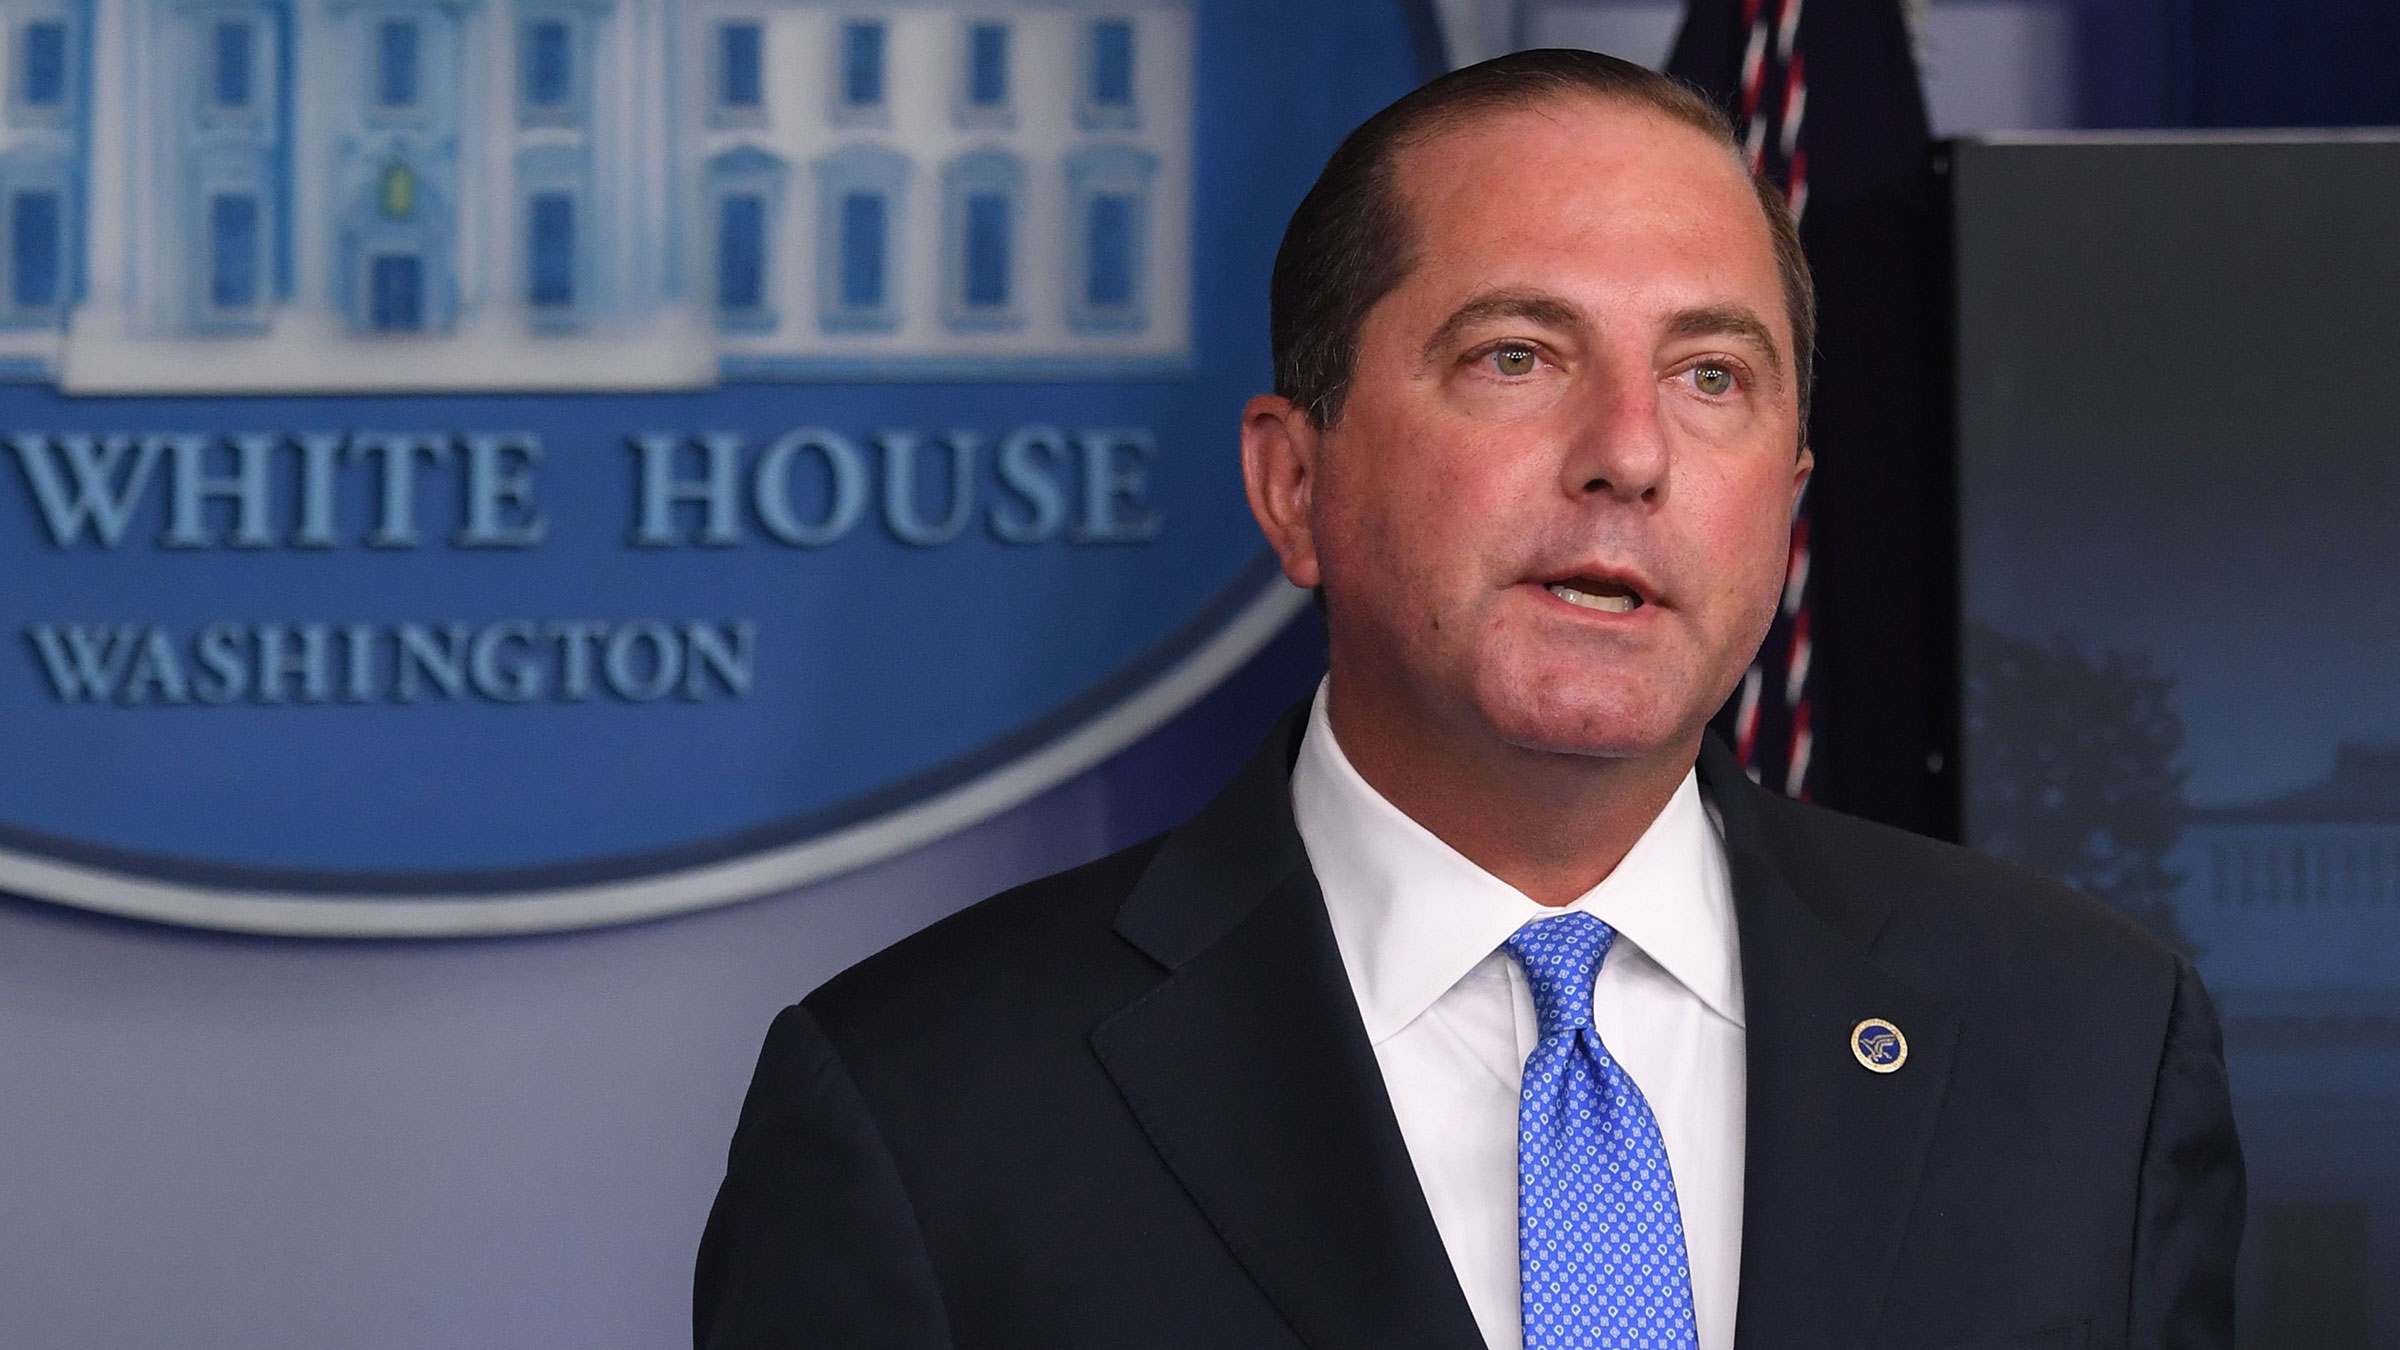 Health and Human Services Secretary Alex Azar speaks during a press conference at the White House on August 23 in Washington, DC